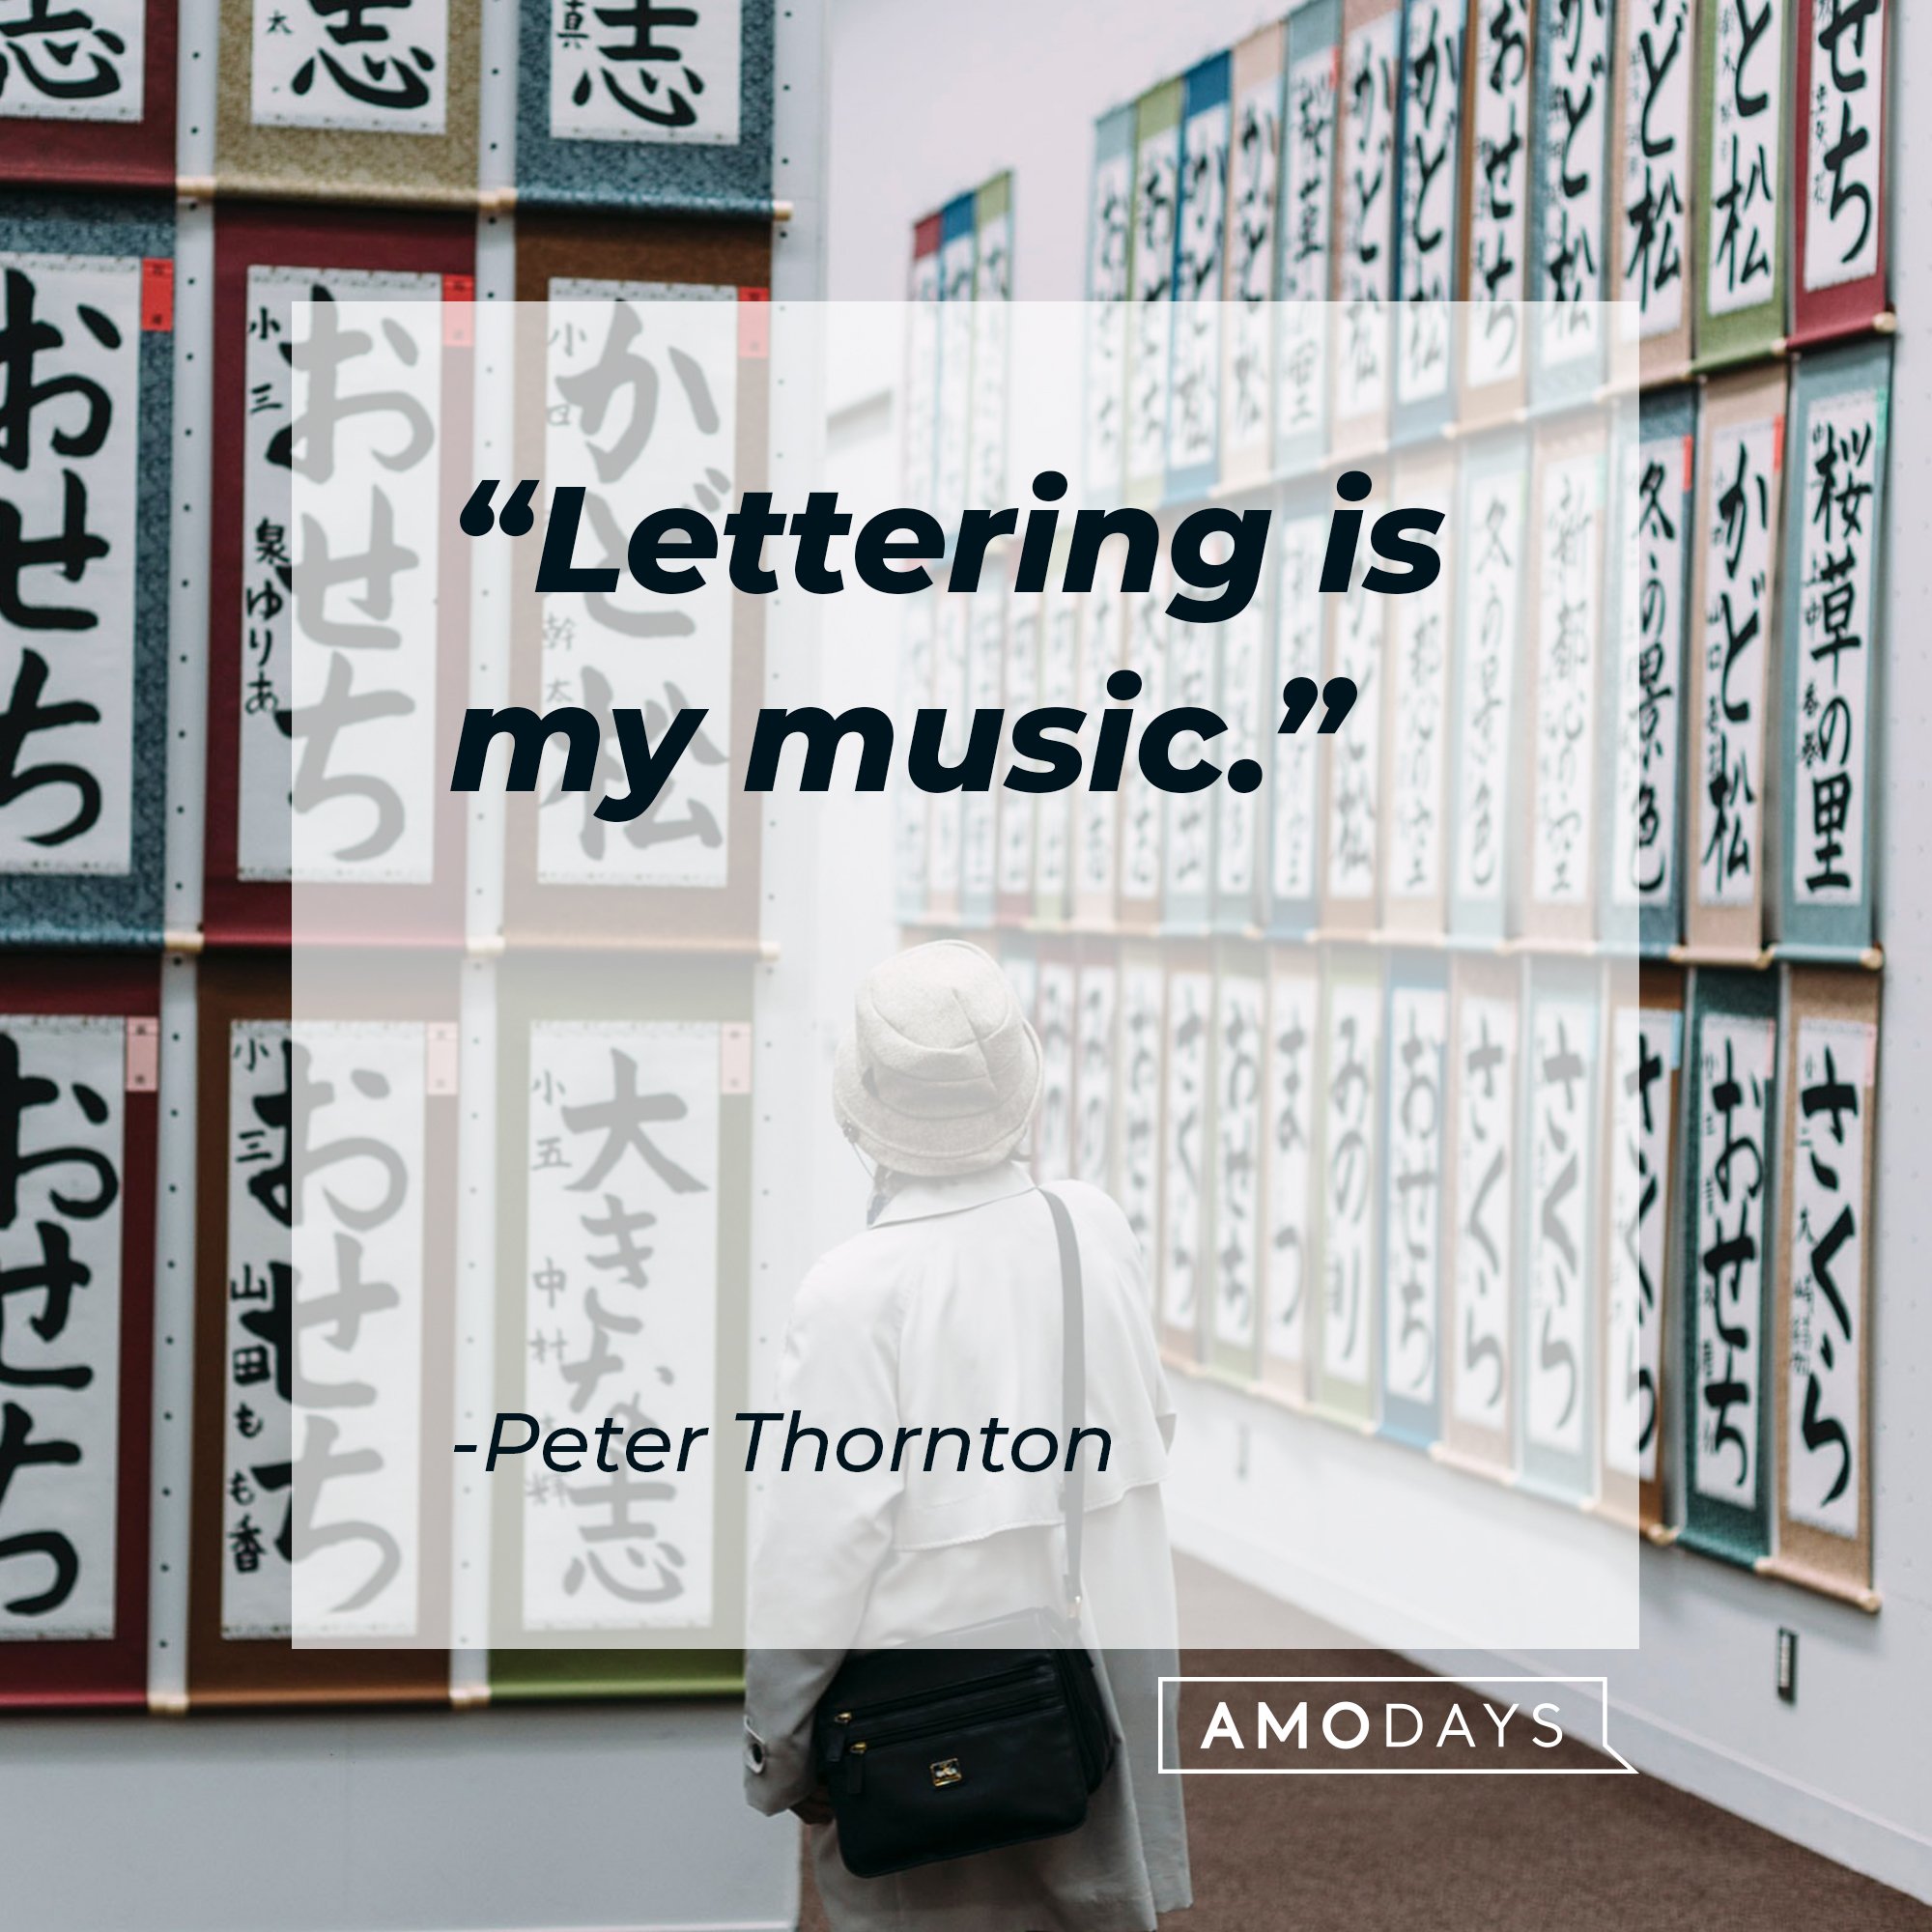 Peter Thornton’s quote: "Lettering is my music." | Image: AmoDays